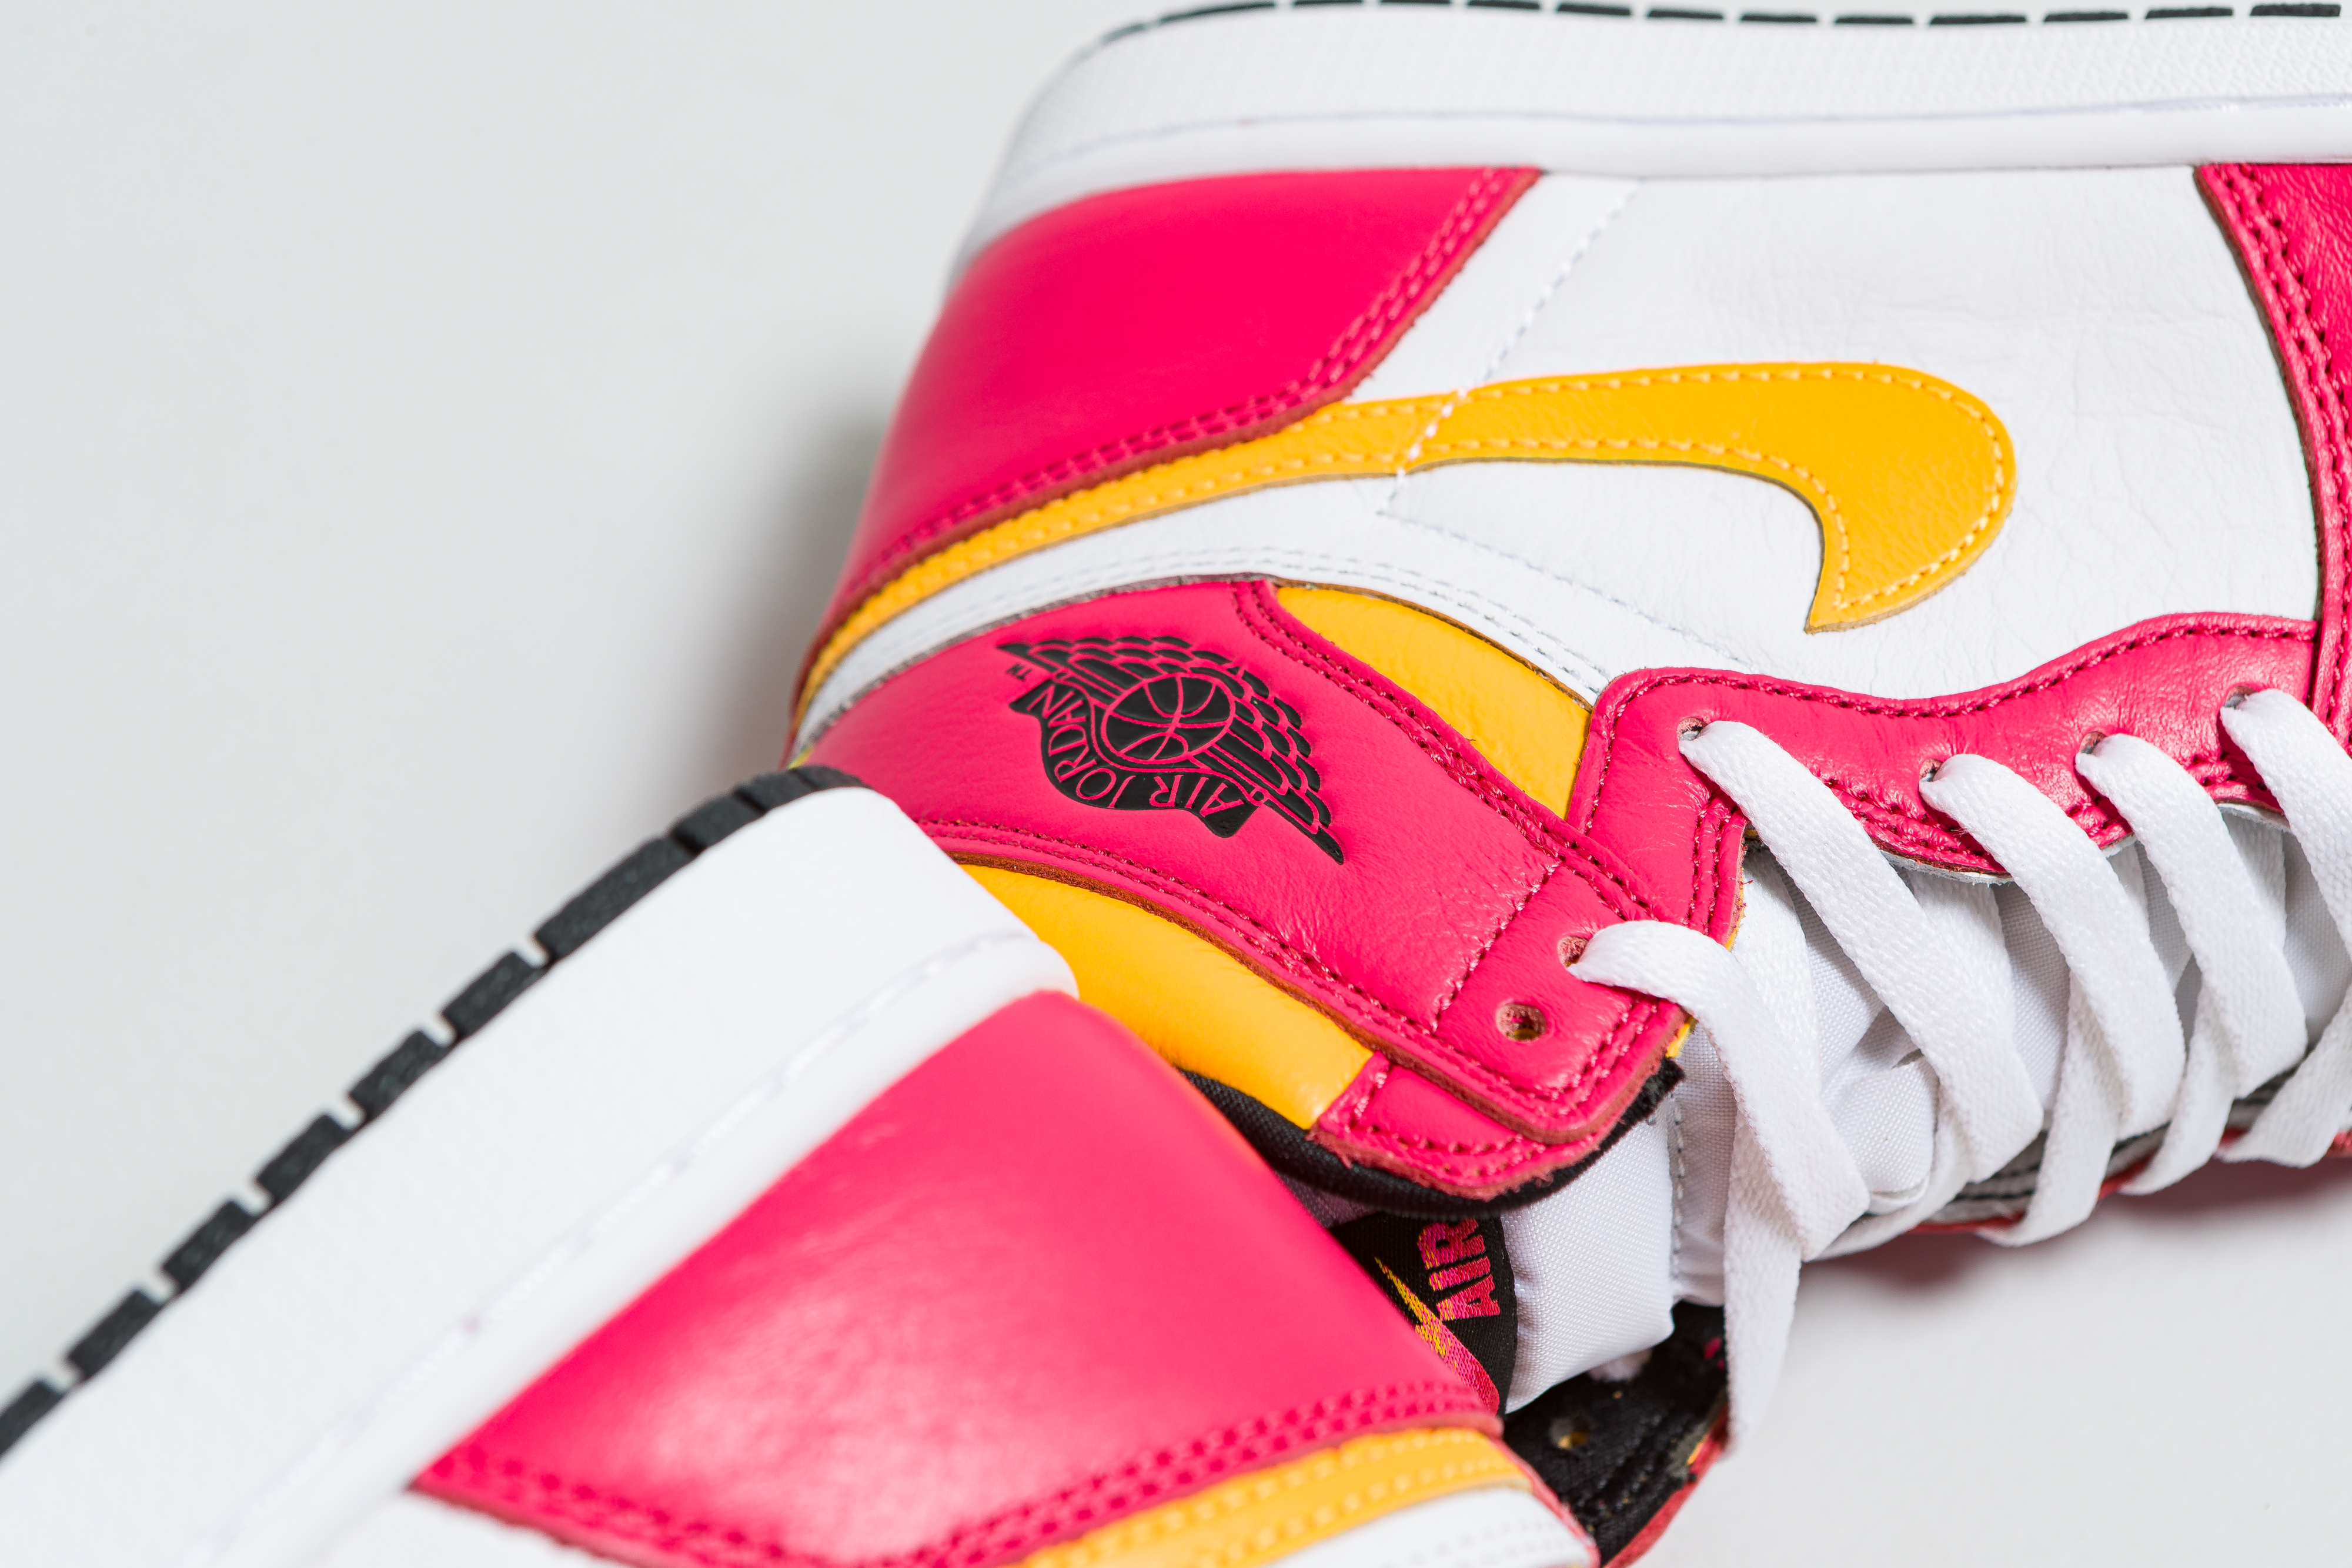 Up There Launches - Nike Air Jordan 1 'Light Fusion Red'